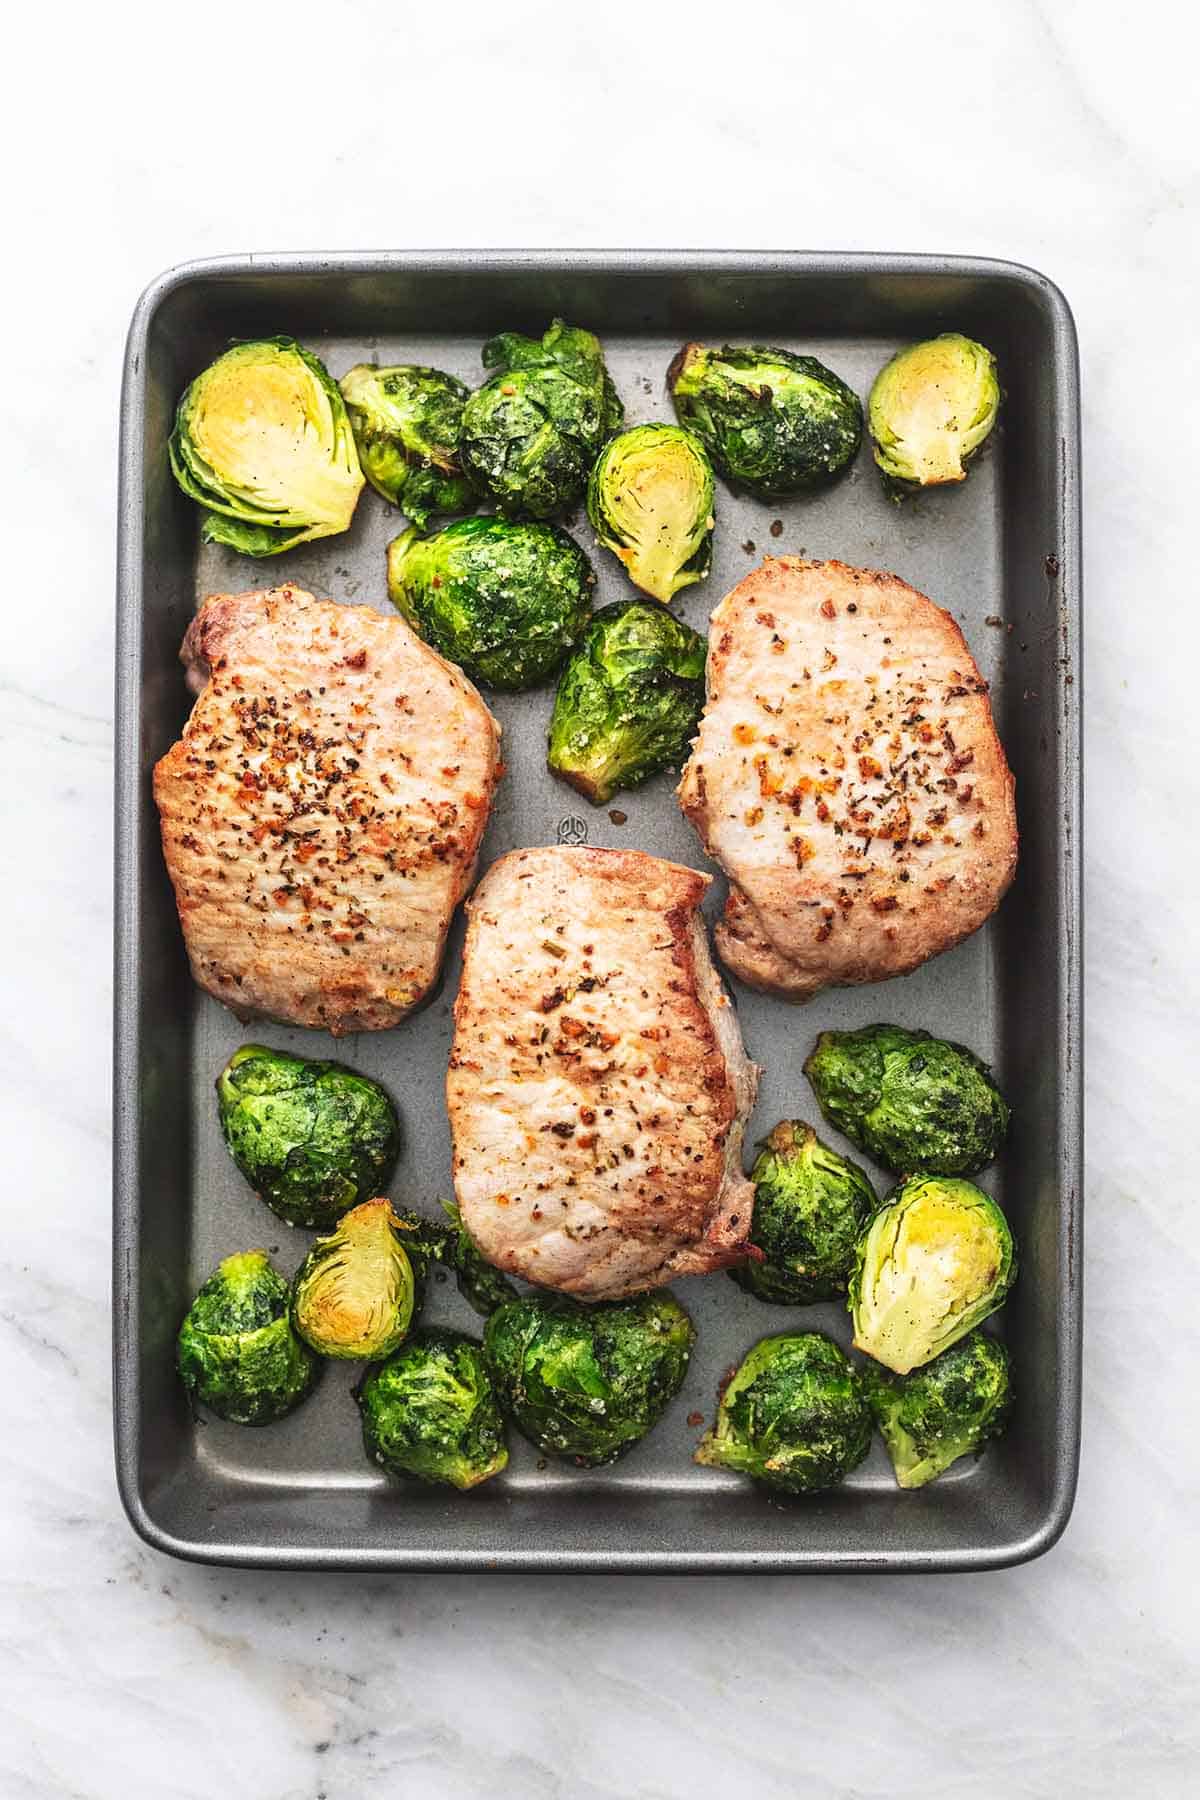 top view of pork chops and brussels sprouts on a baking sheet.